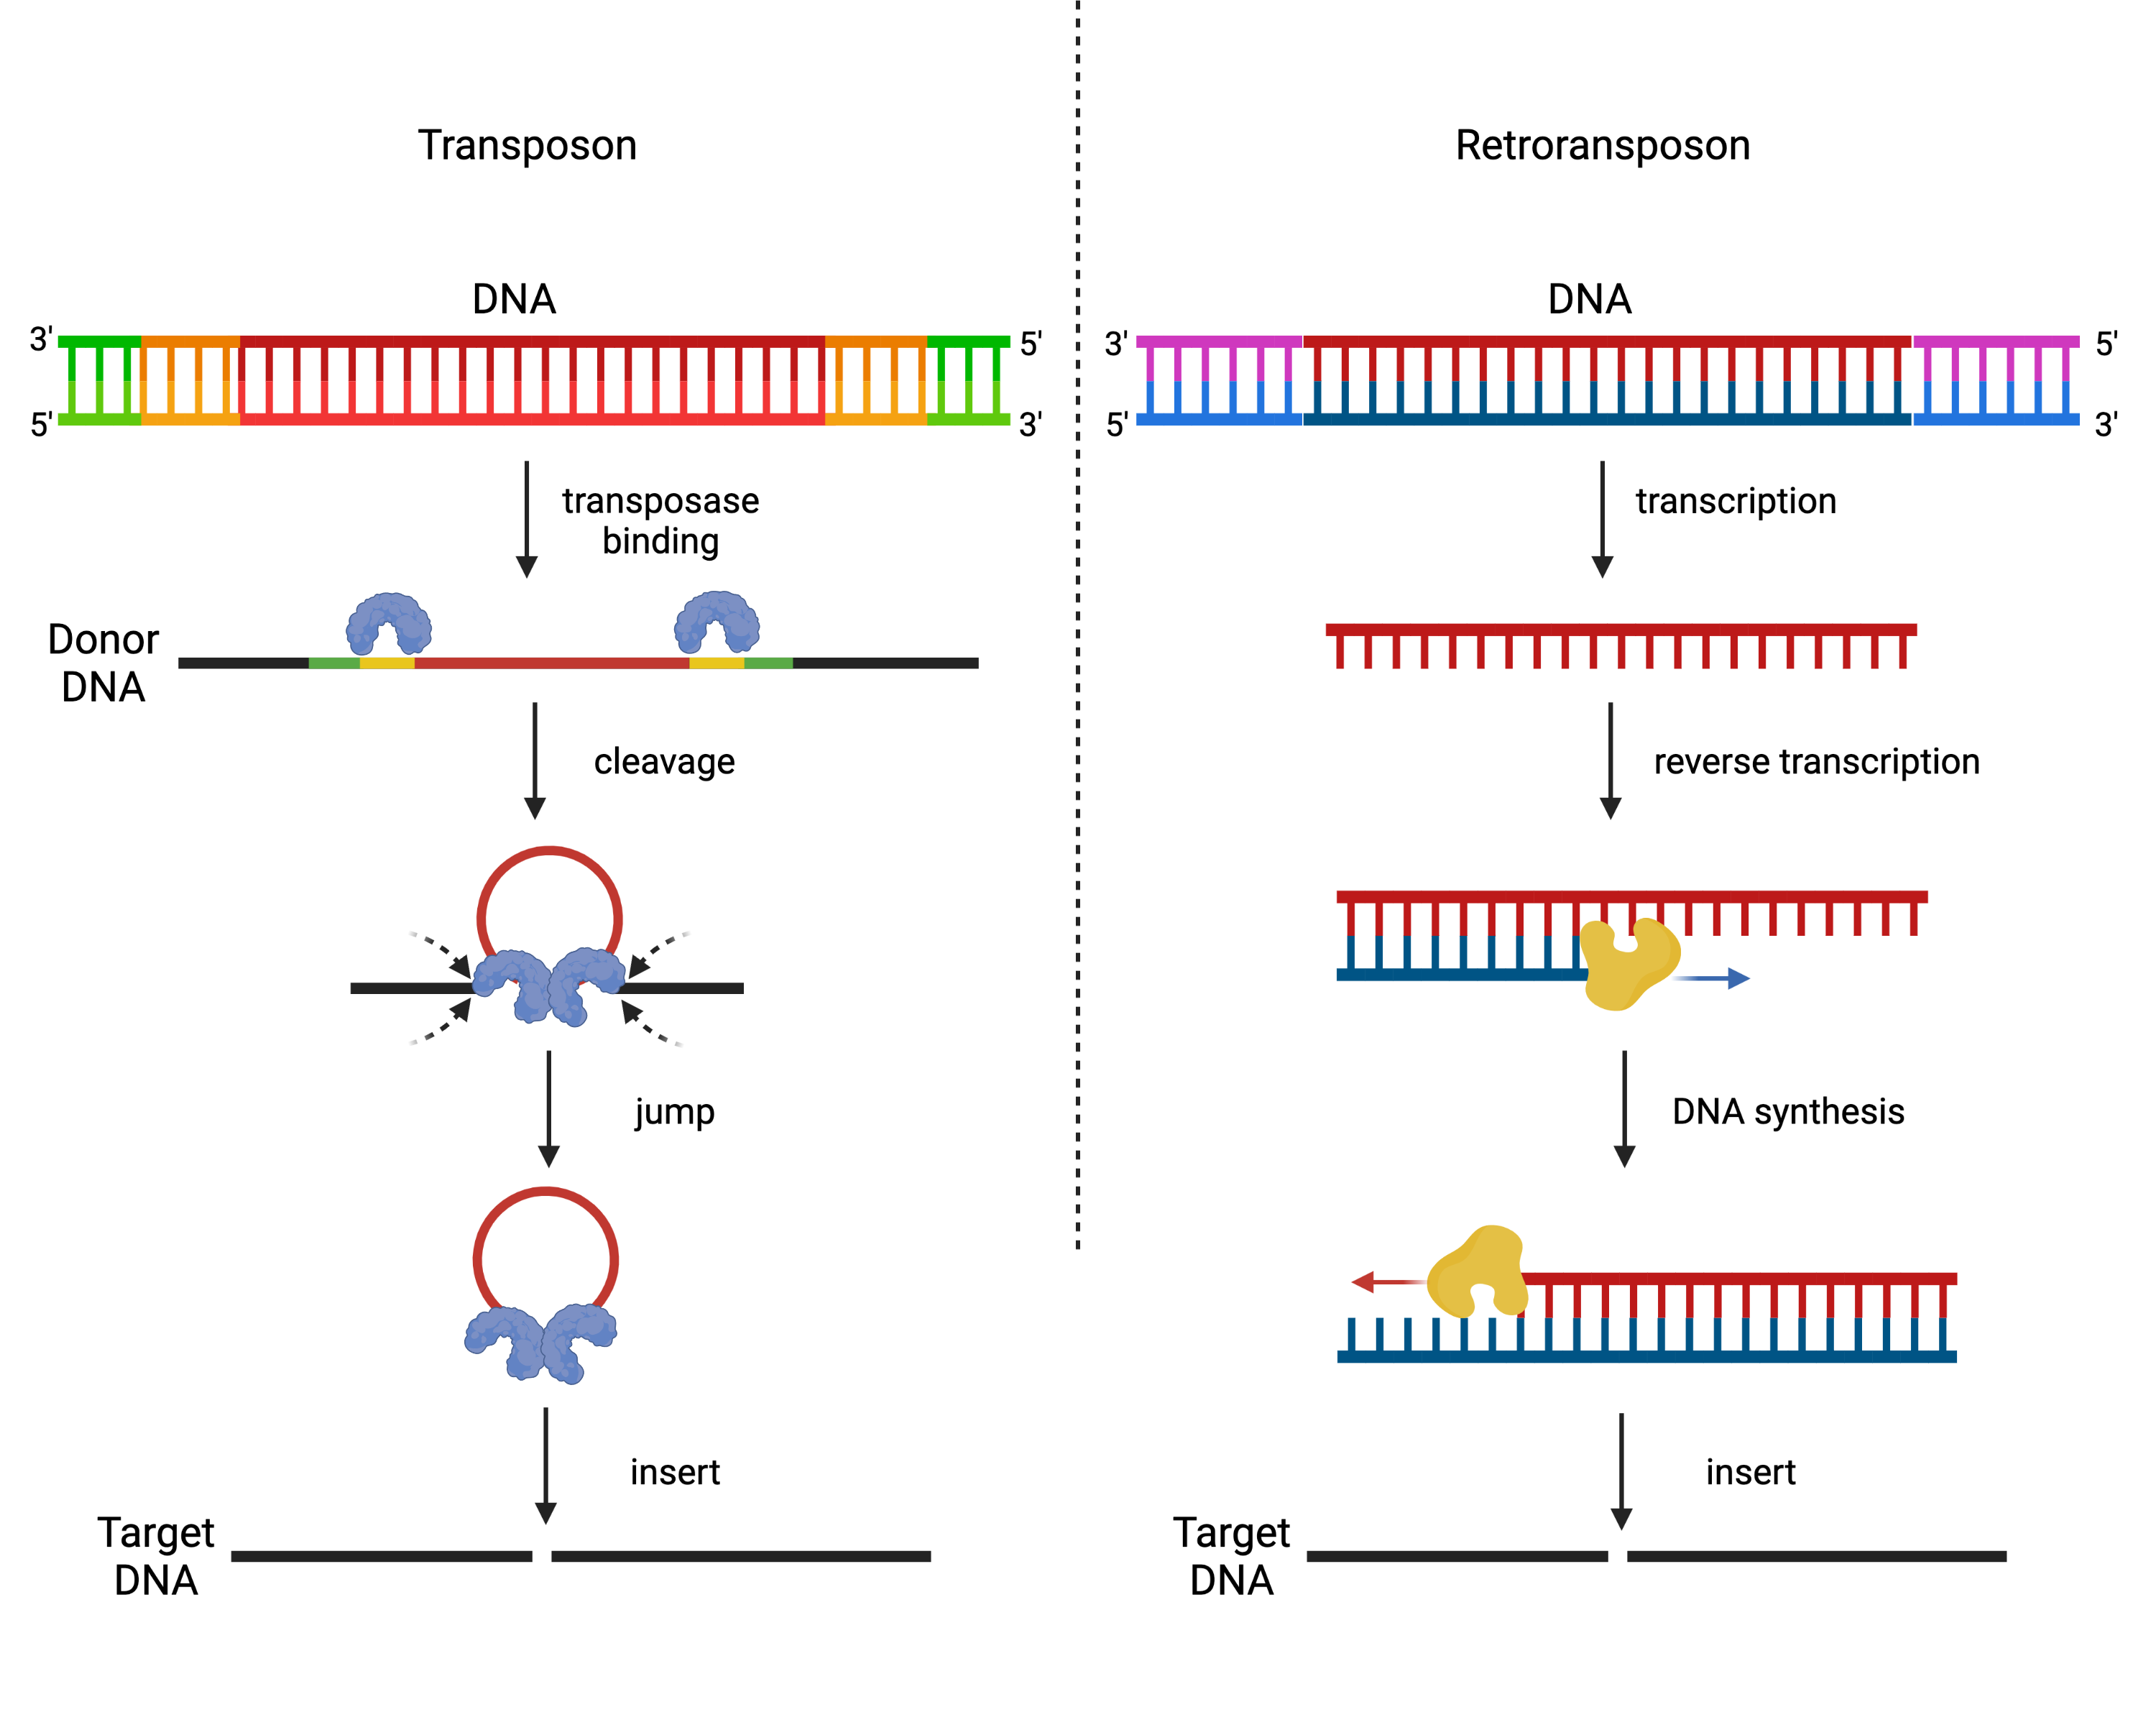 Figure comparing differences between transposons and retrotransposons